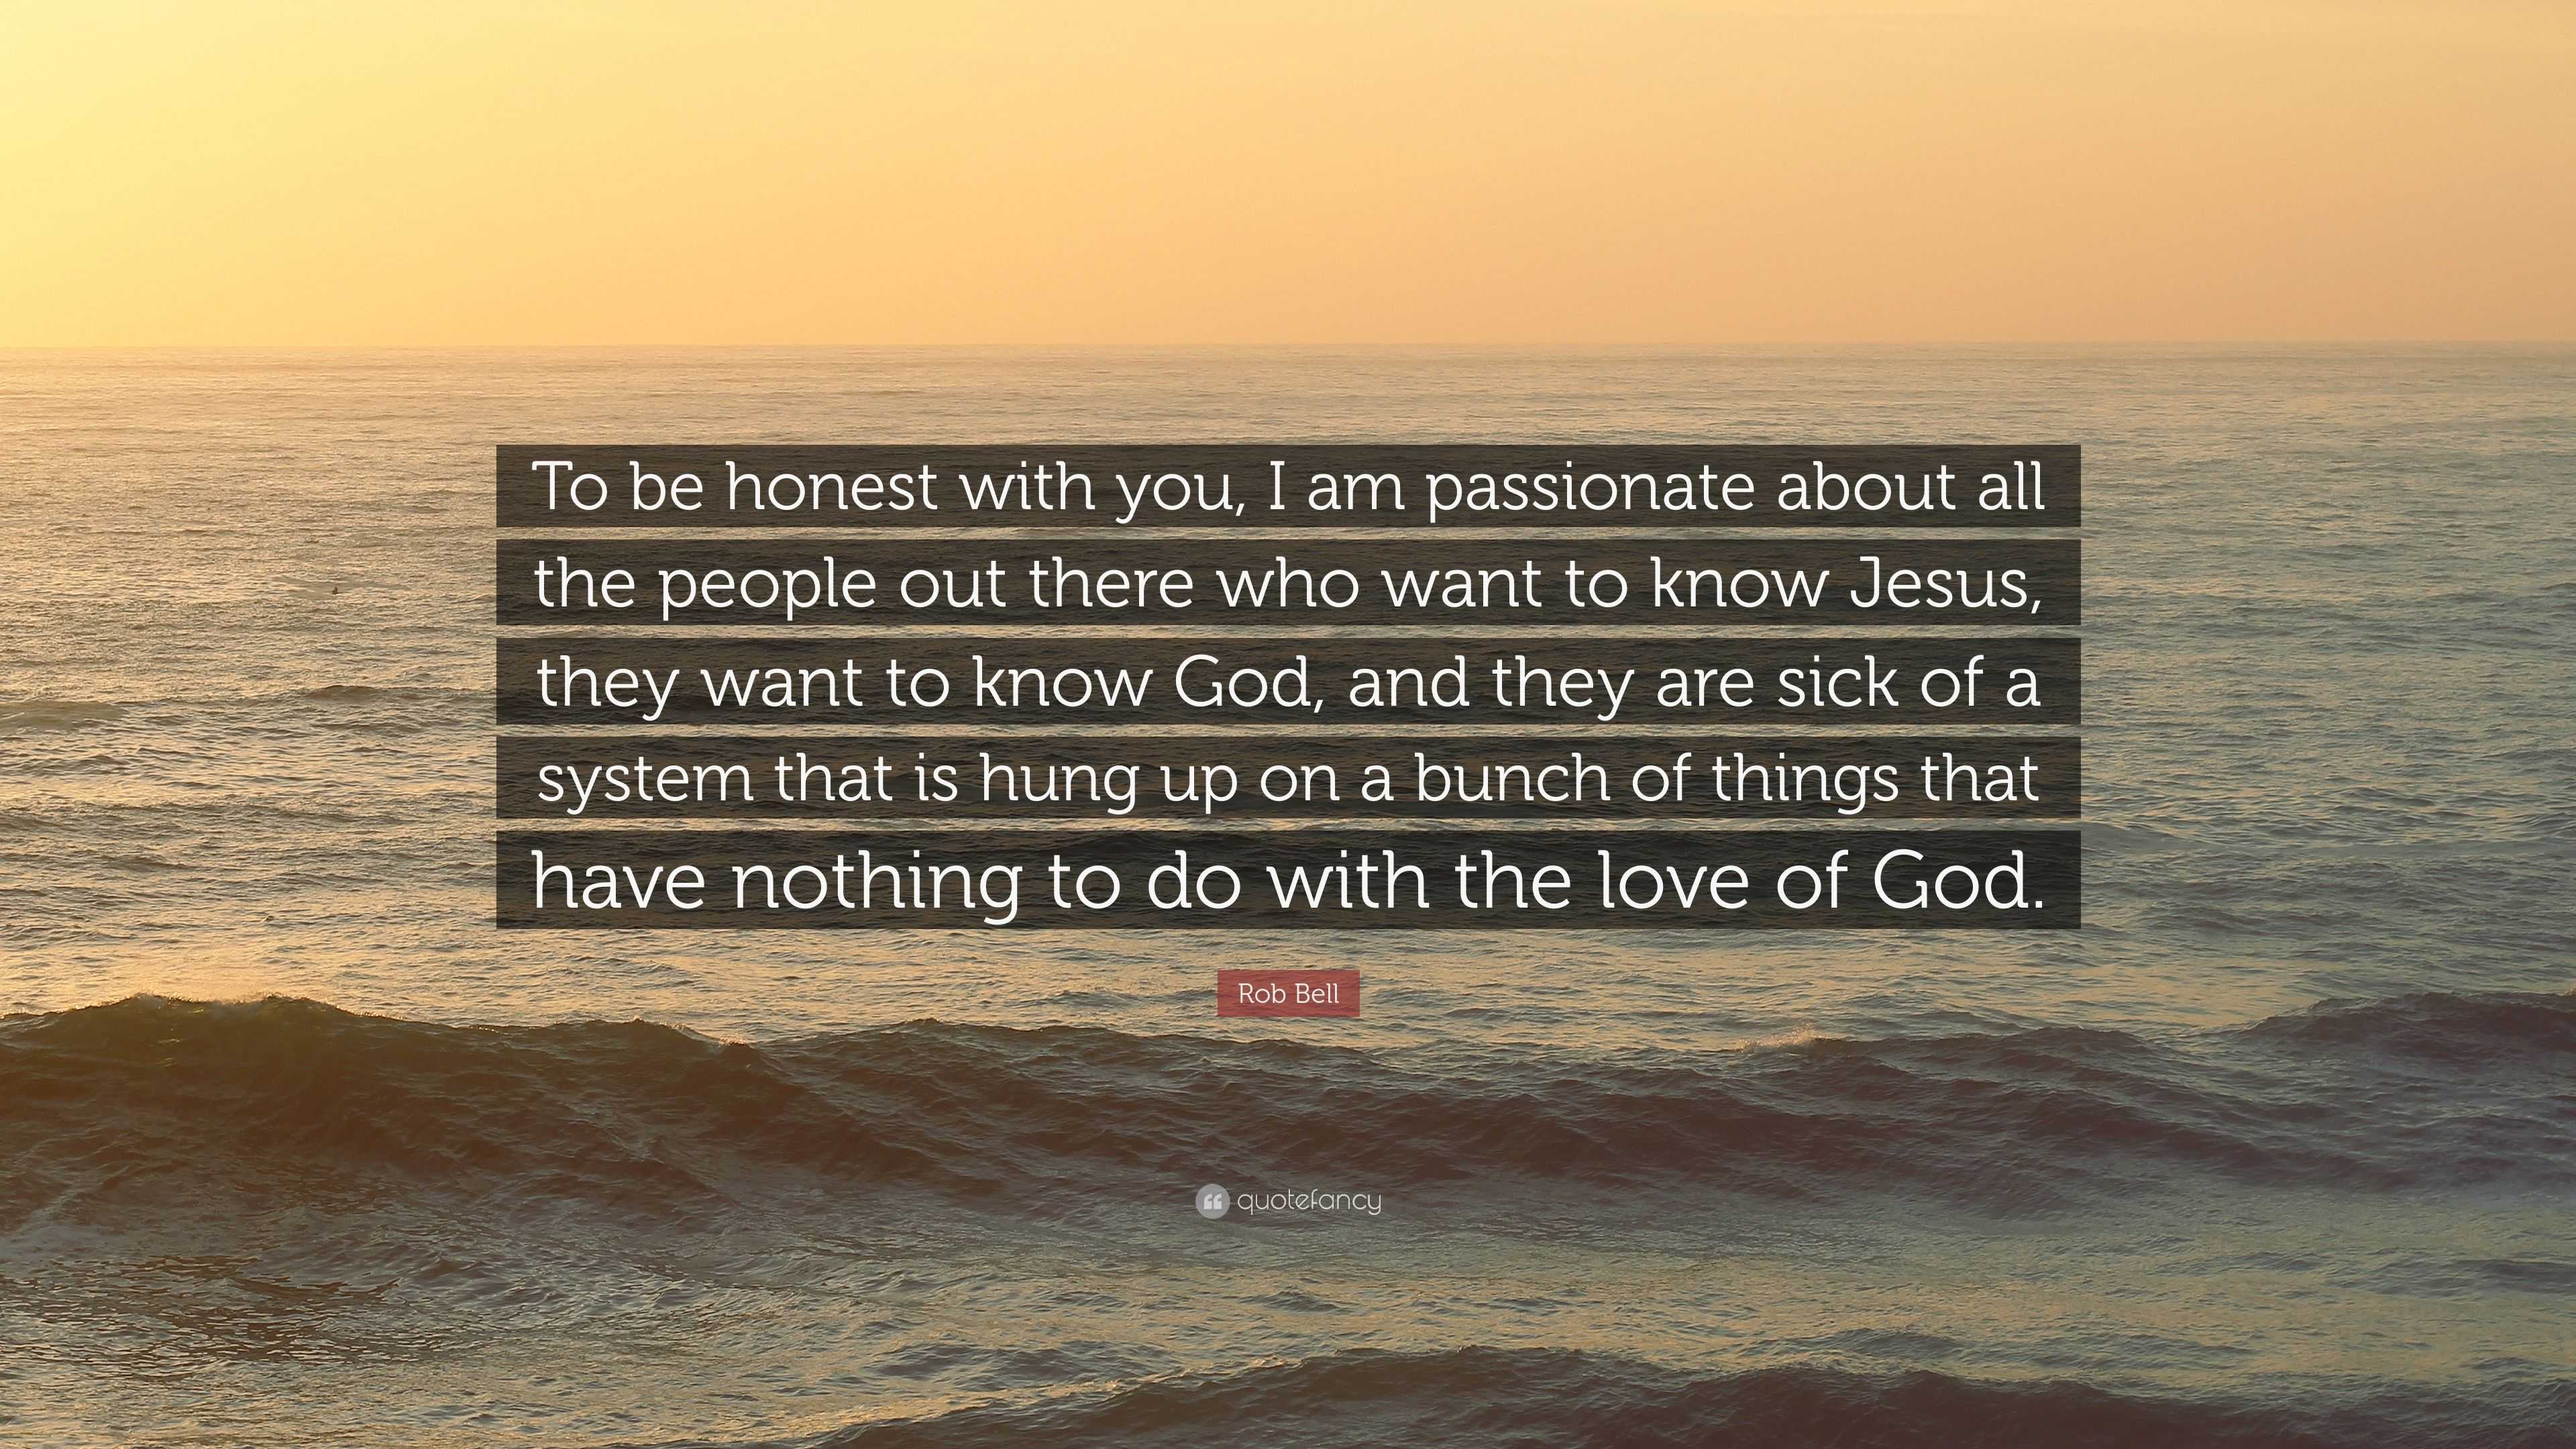 God wants a real, honest and loving relationship